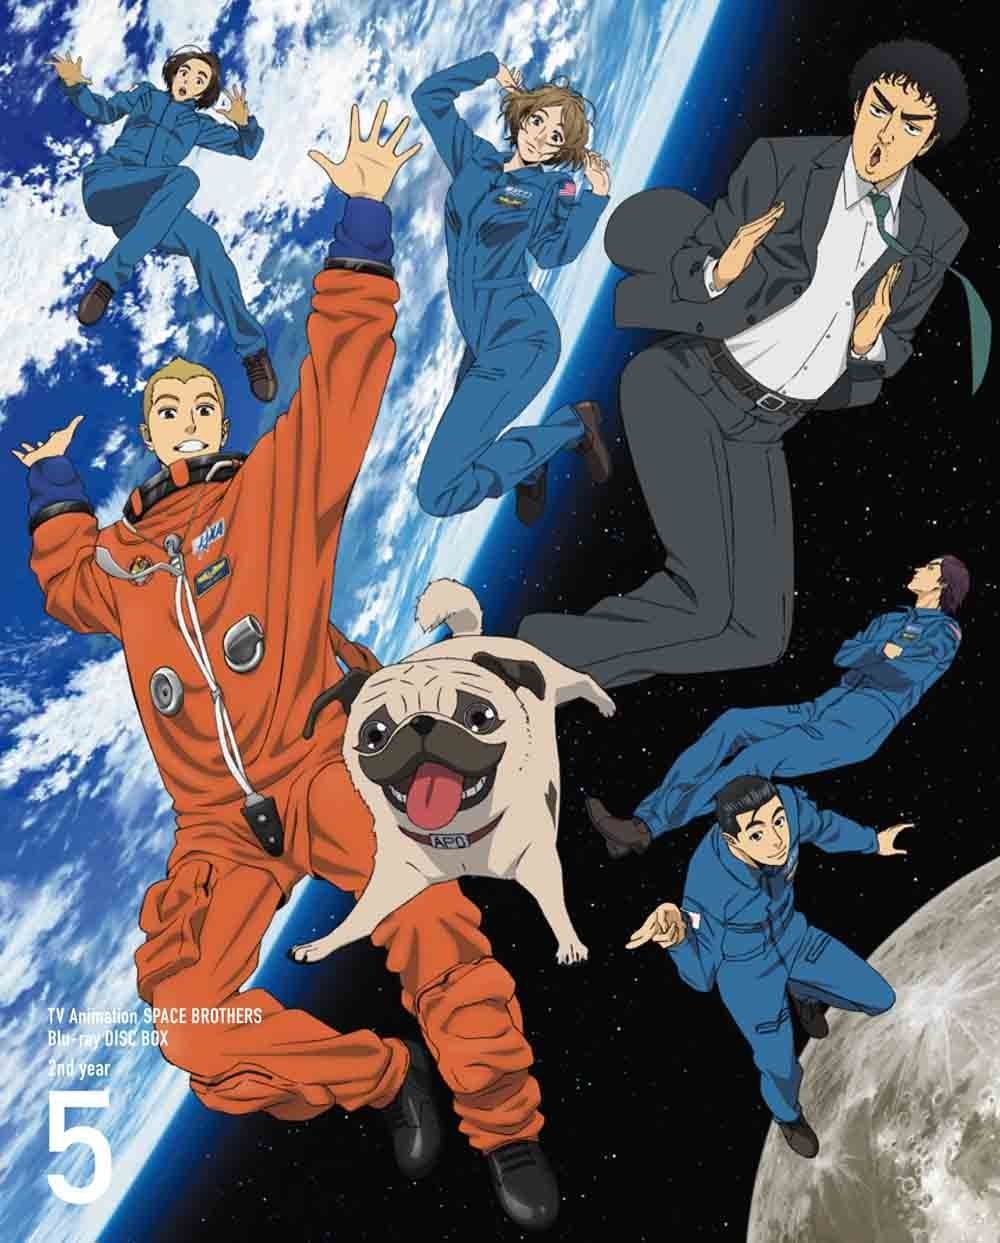 Uchuu Kyoudai Or Space Brothers As It S Better Known Is One Of